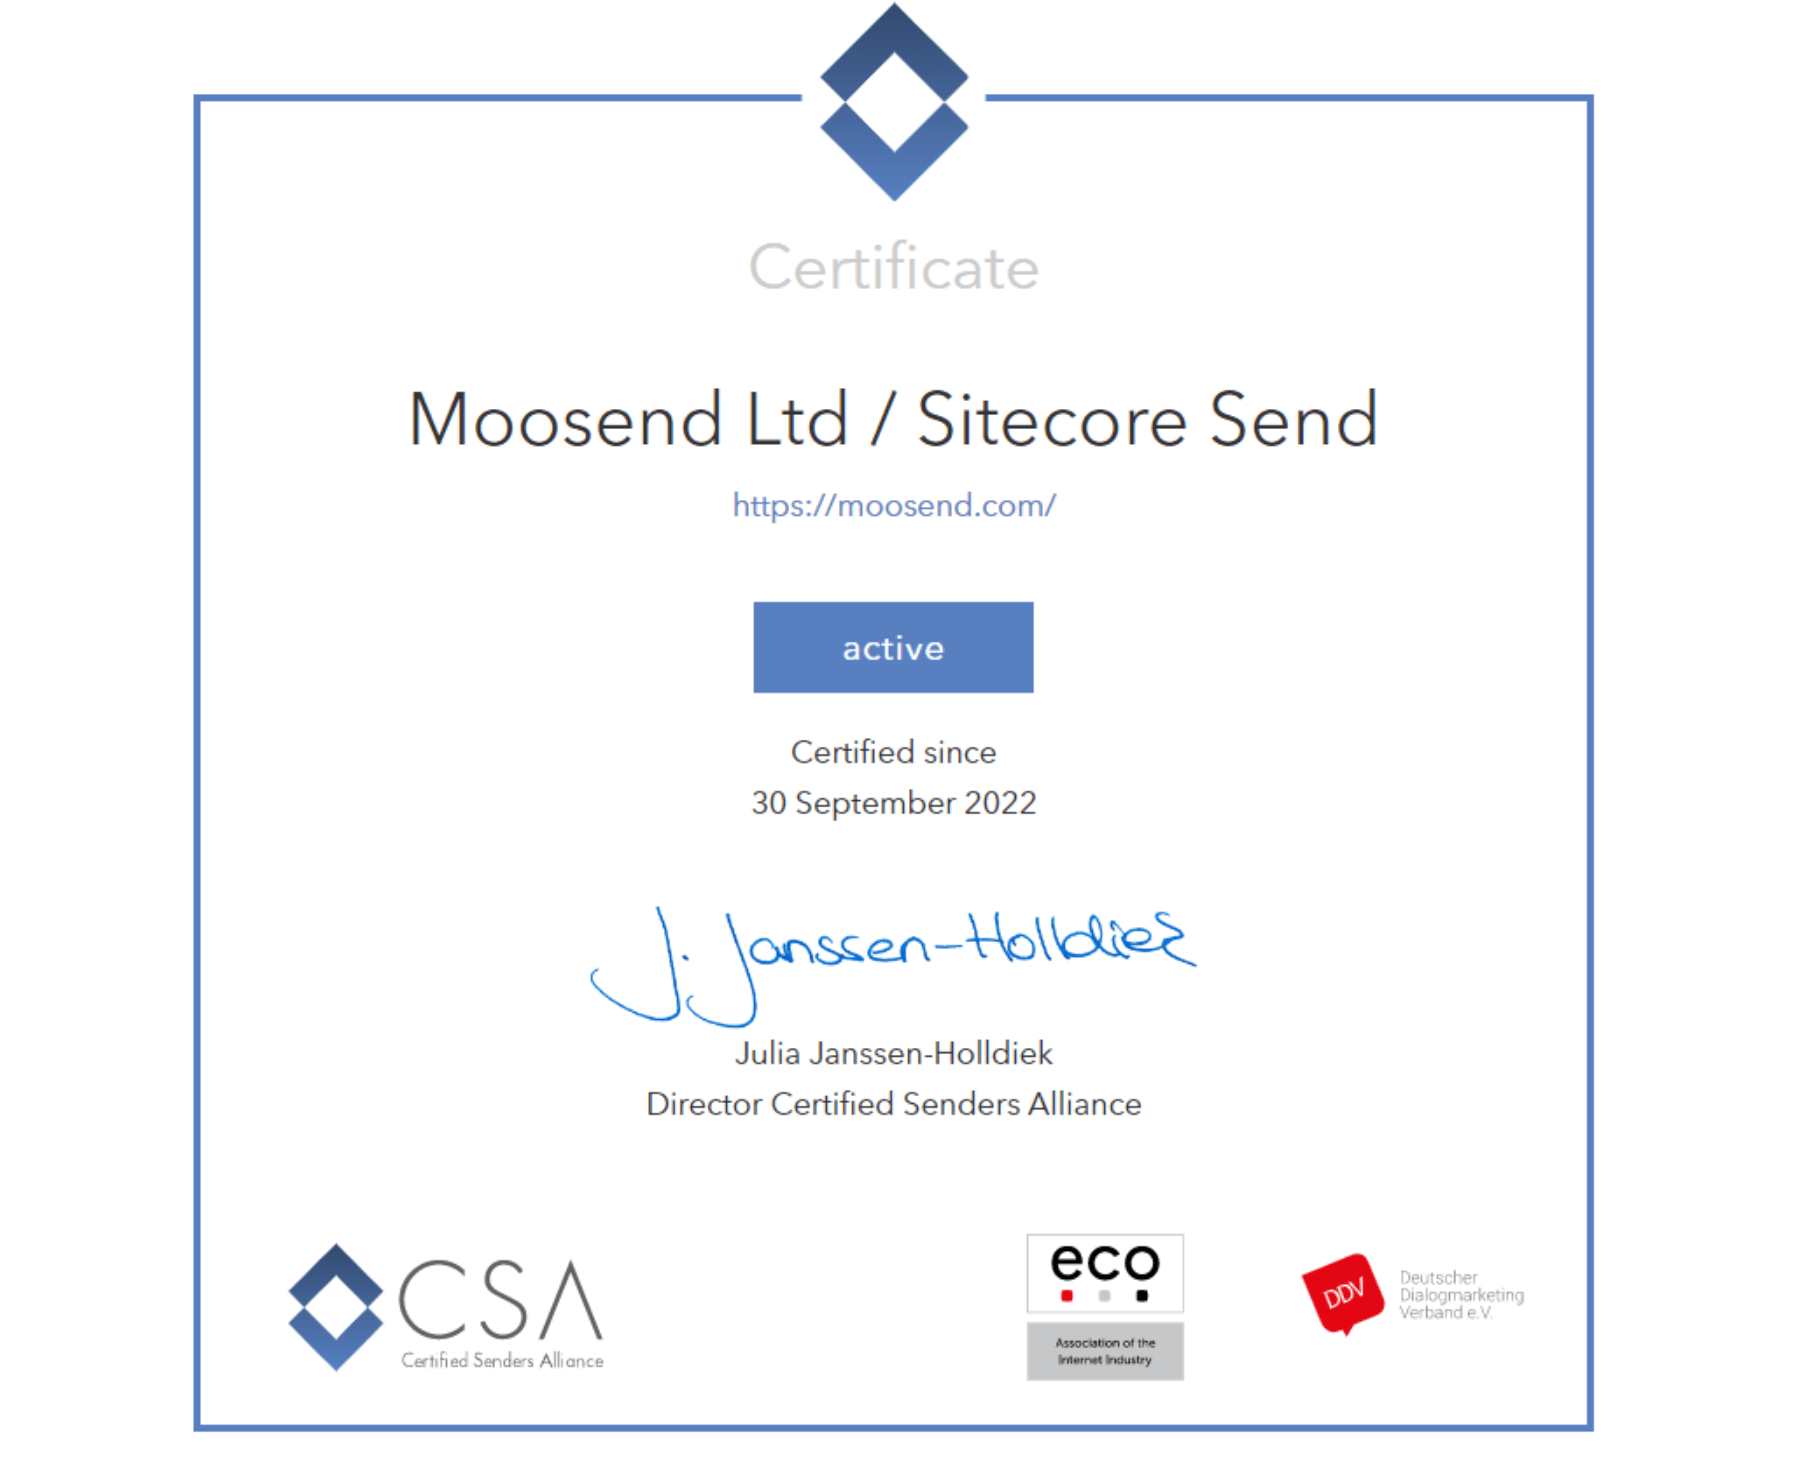 CSA certification for Moosend and Sitecore Send